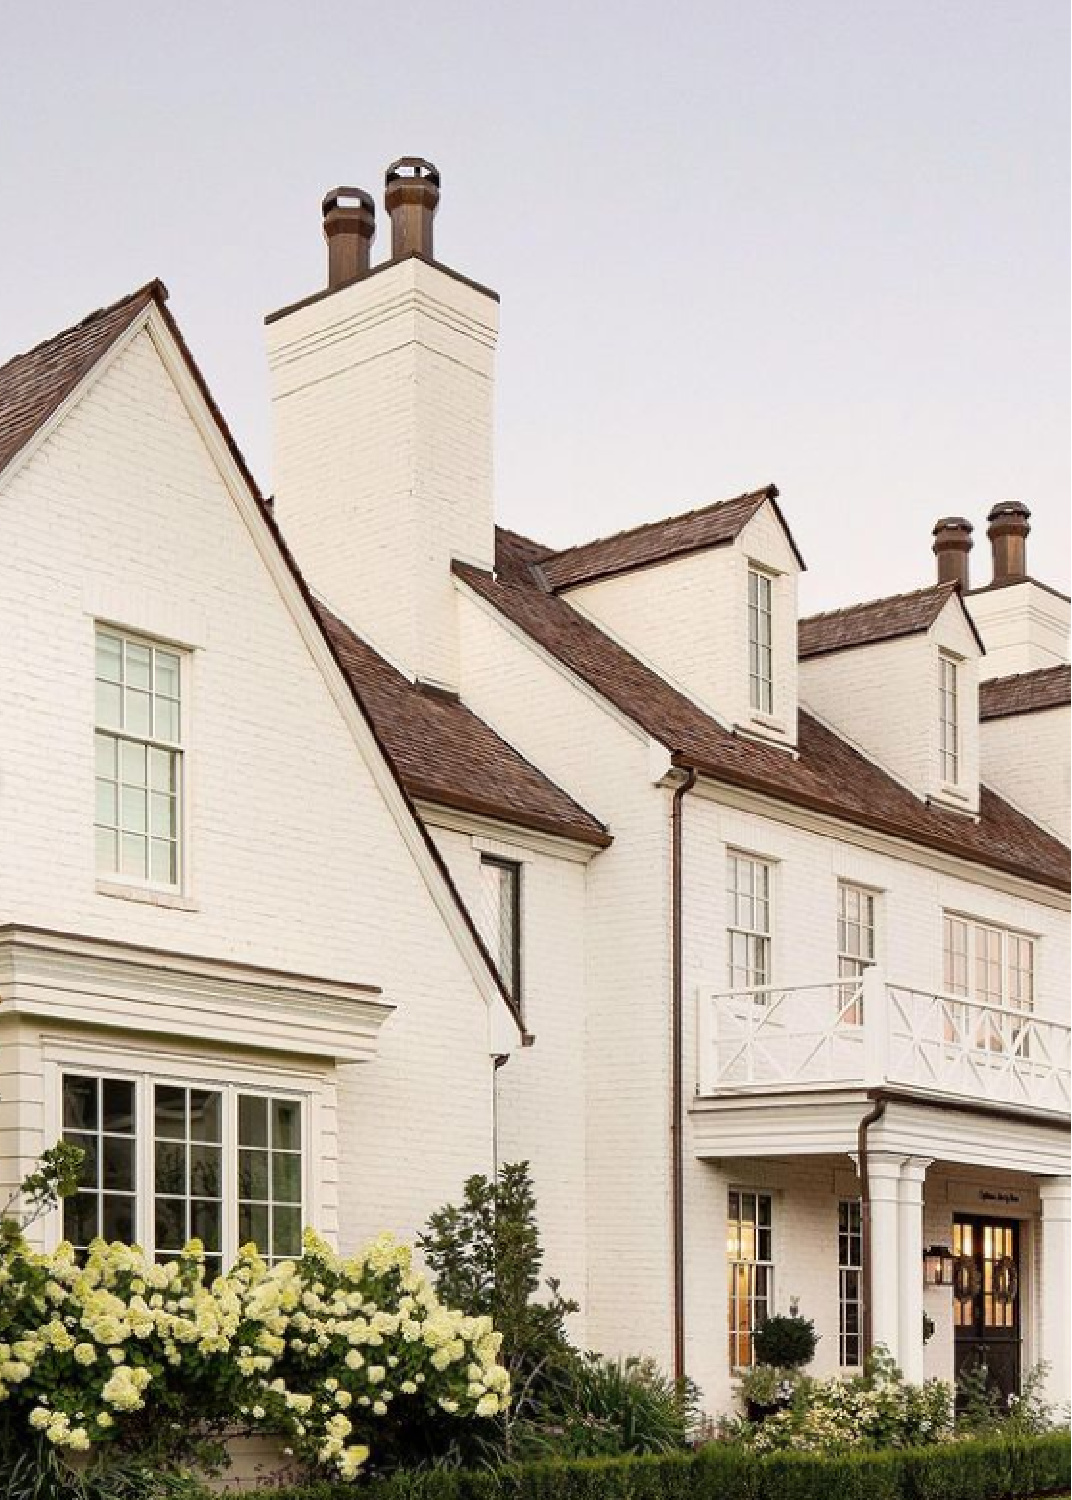 Traditional style white brick painted house exterior with dormers and timeless style by The Fox Group. #houseexteriors #whitebrick #whitehouses